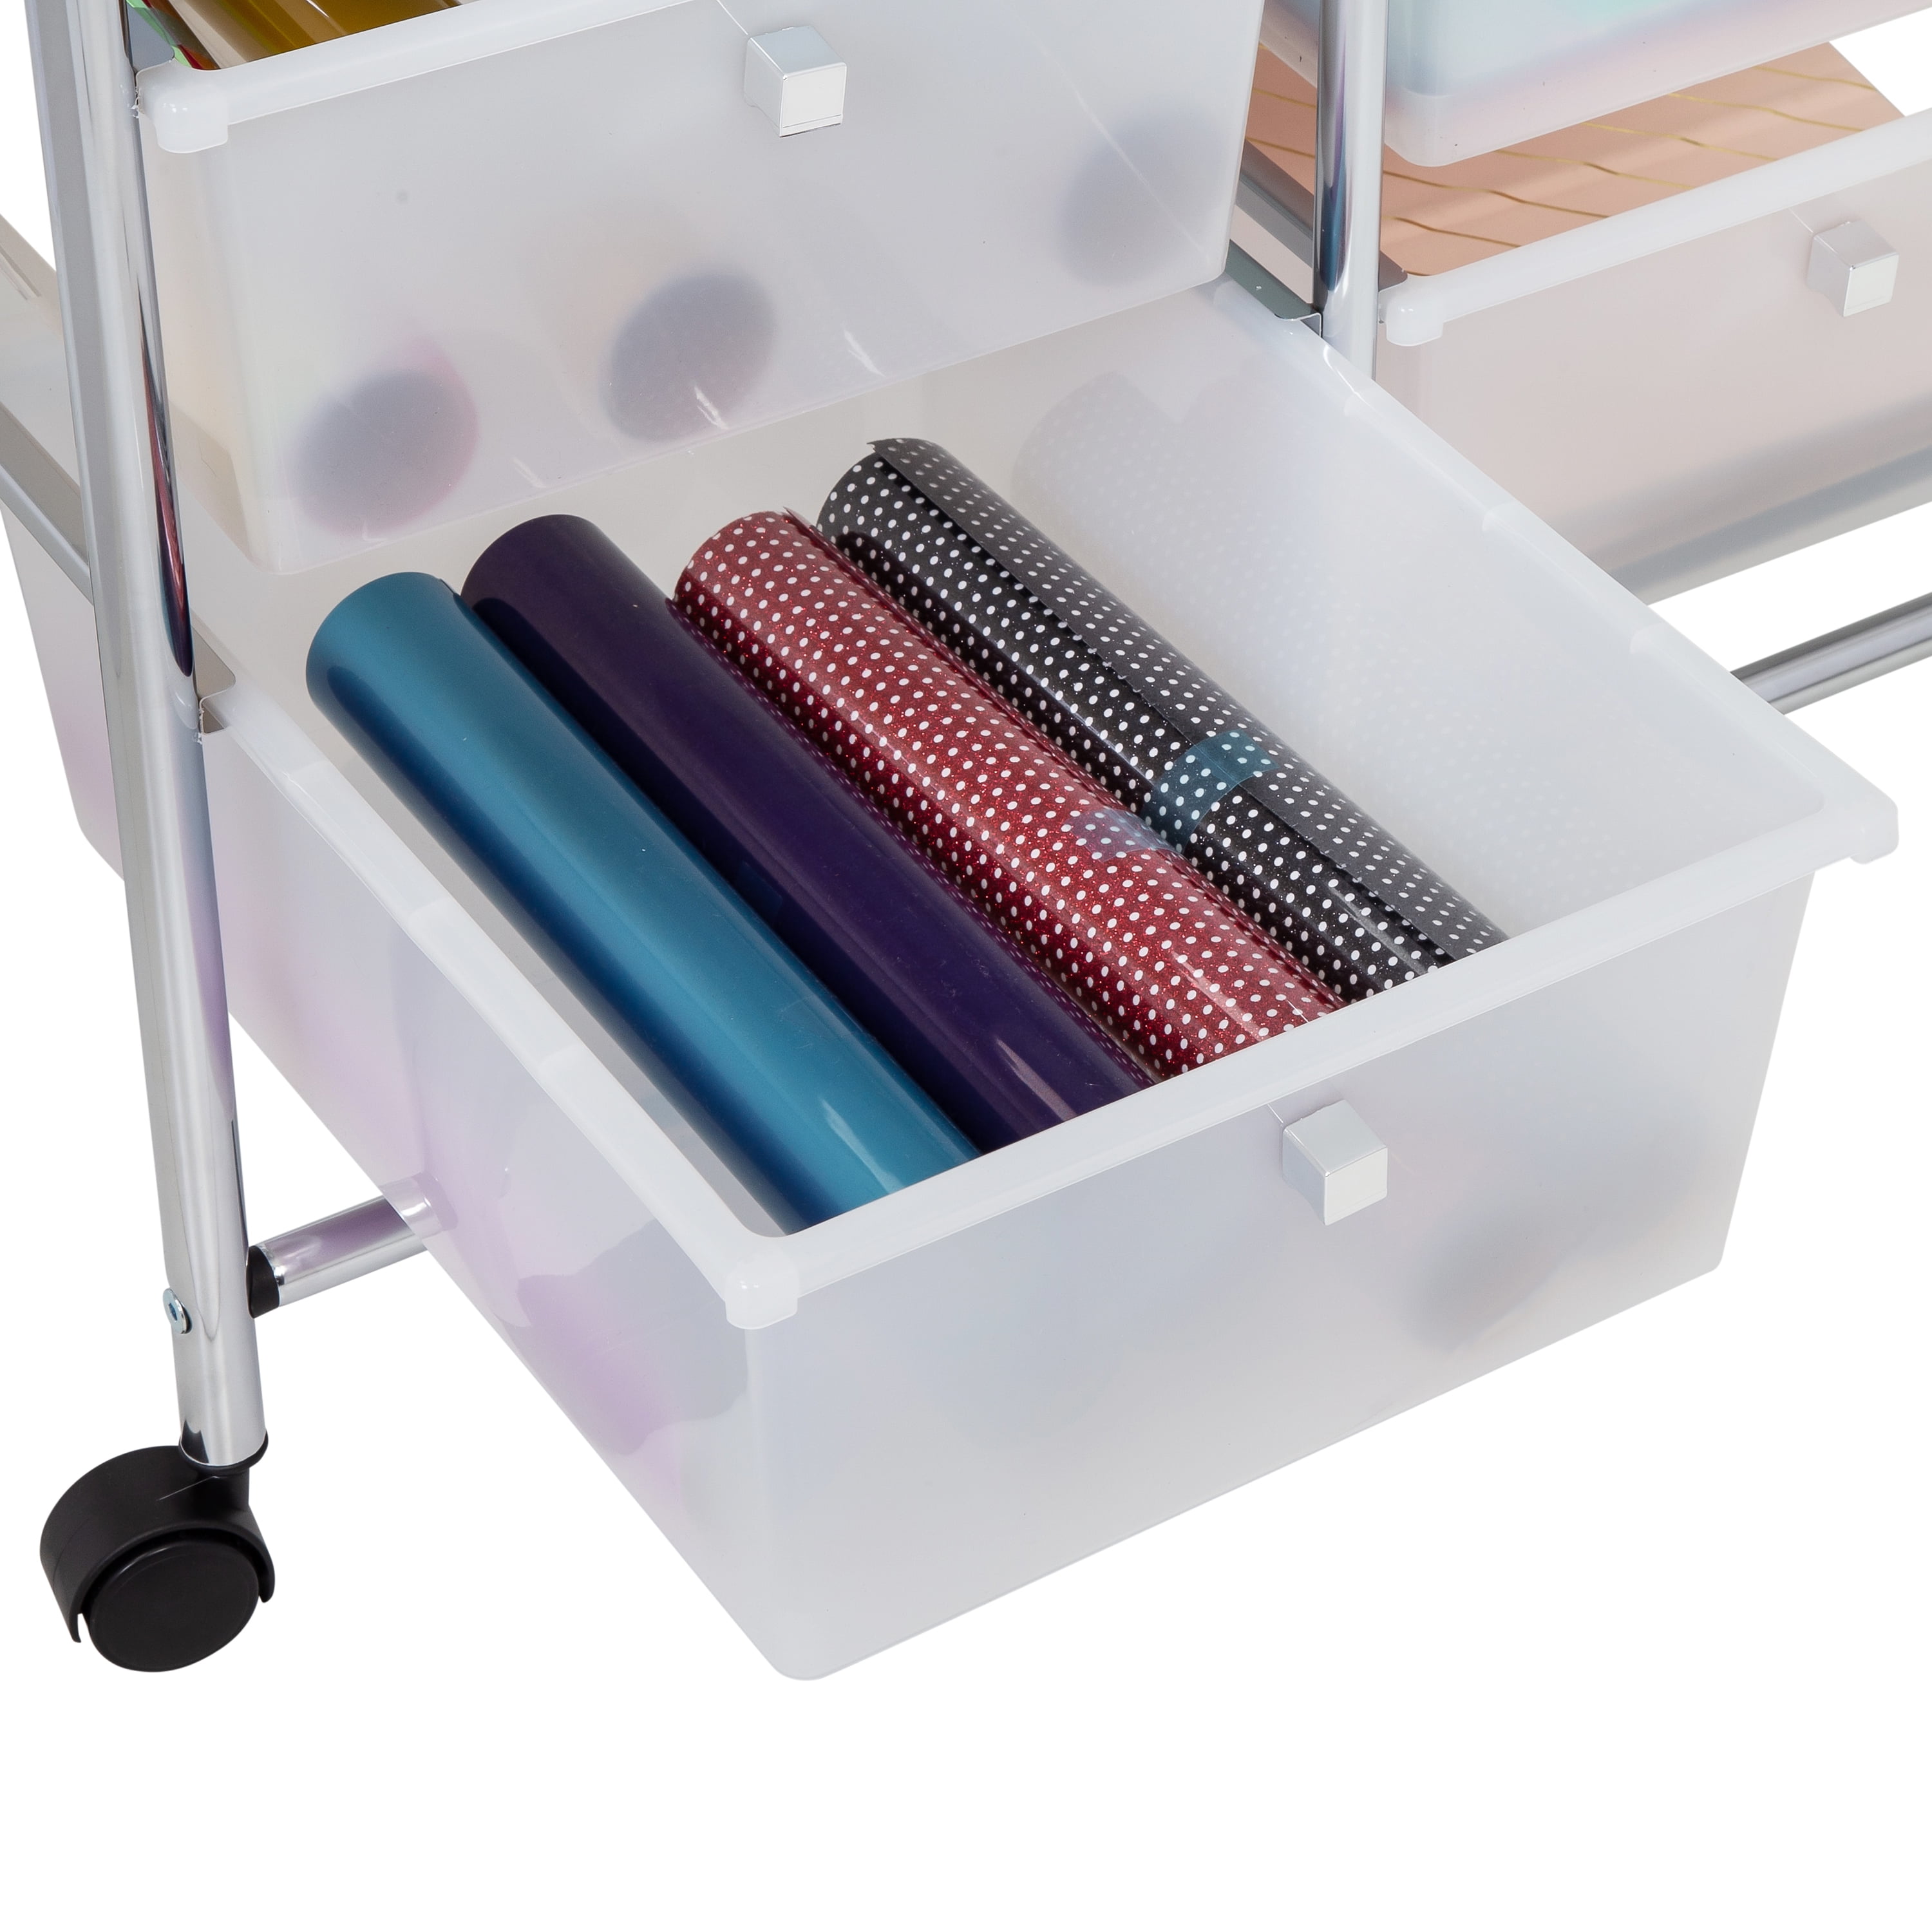  SILKYDRY Rolling Storage Cart with 12 Drawers